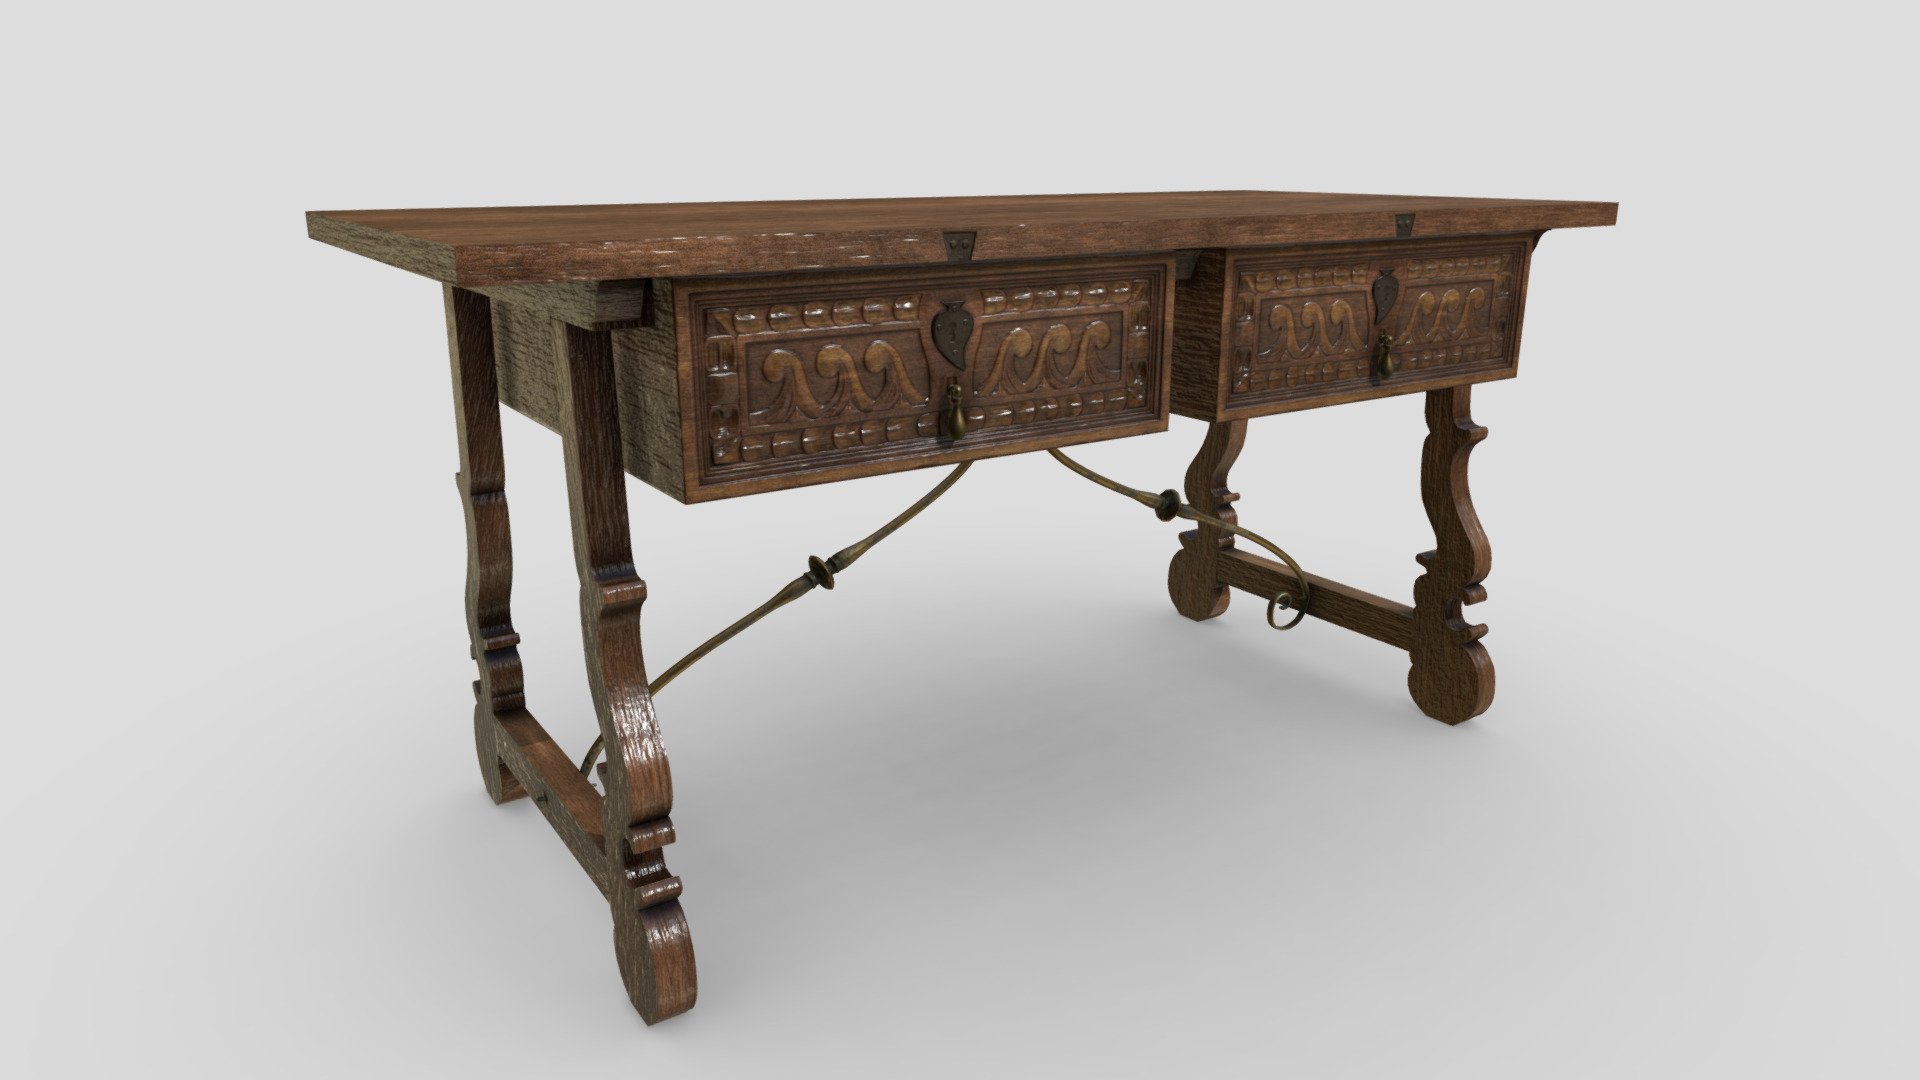 A nice old spanish table. Made in Blender / Substance Painter 3d model